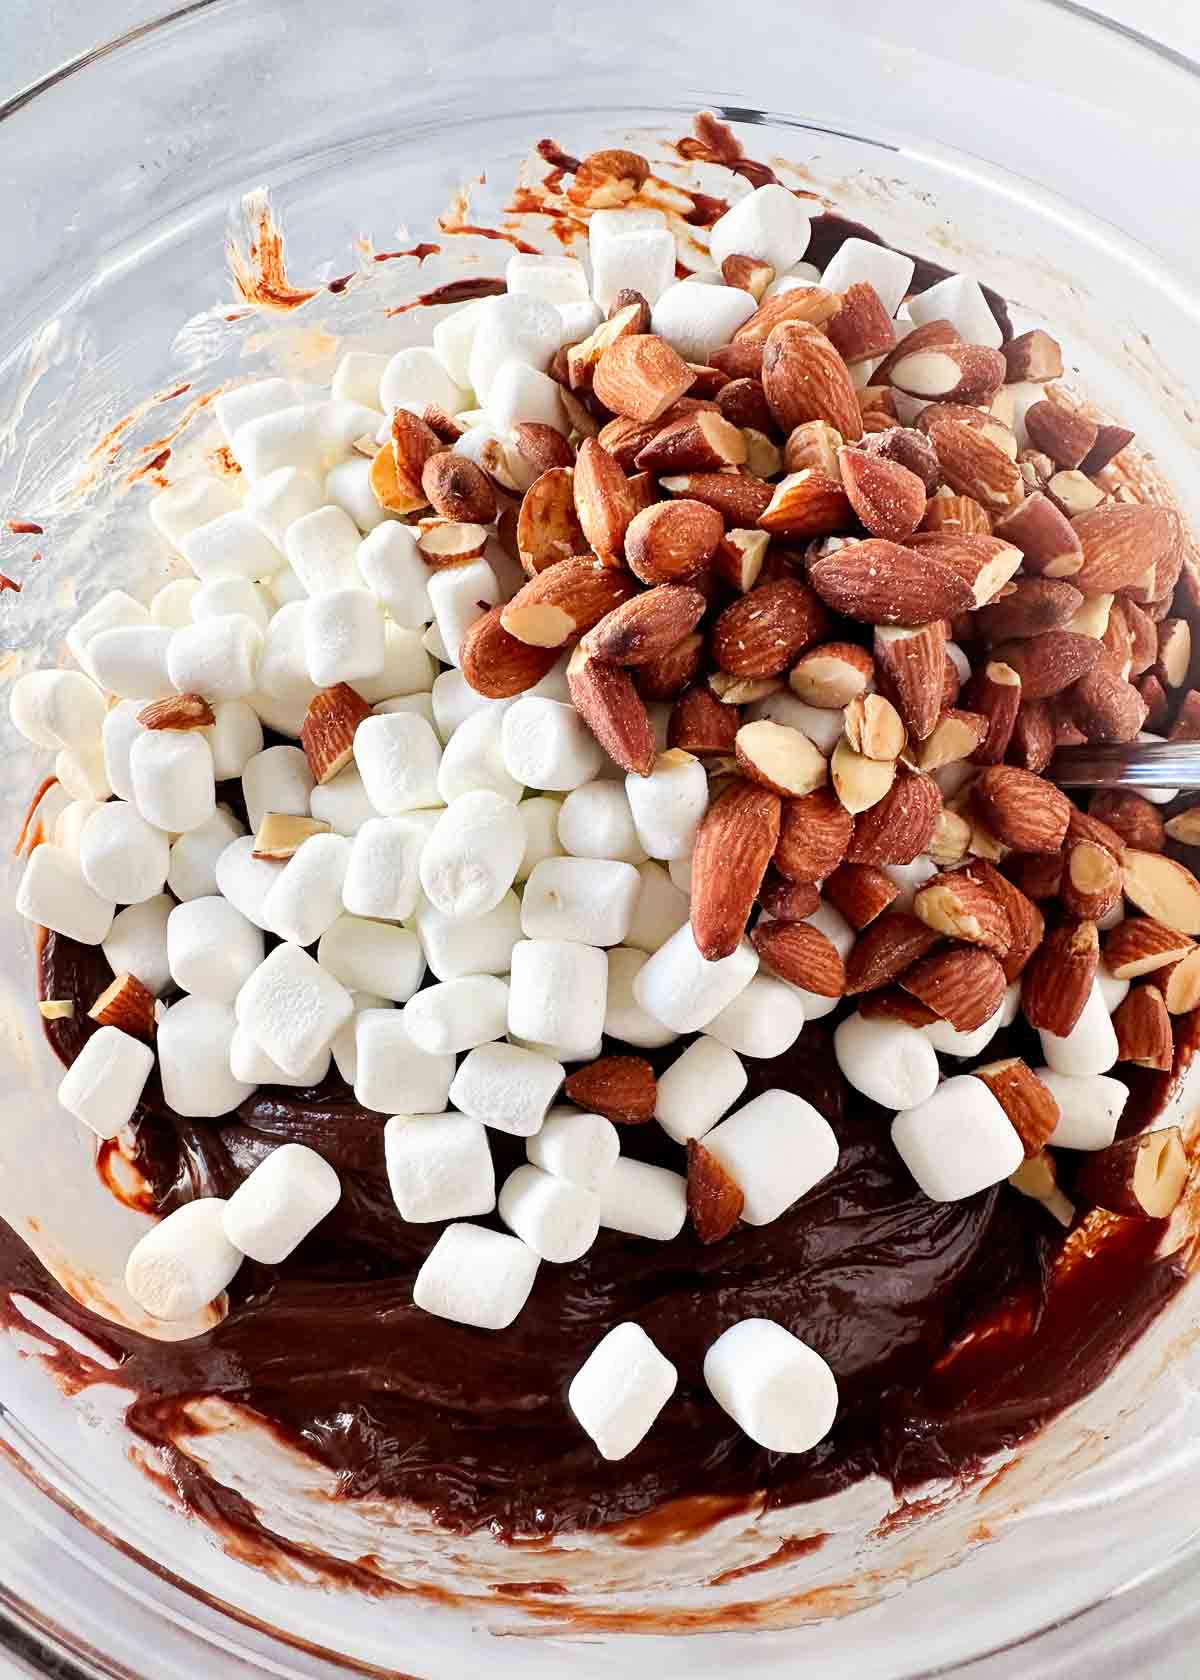 Showing how to make rocky road fudge in a bowl.